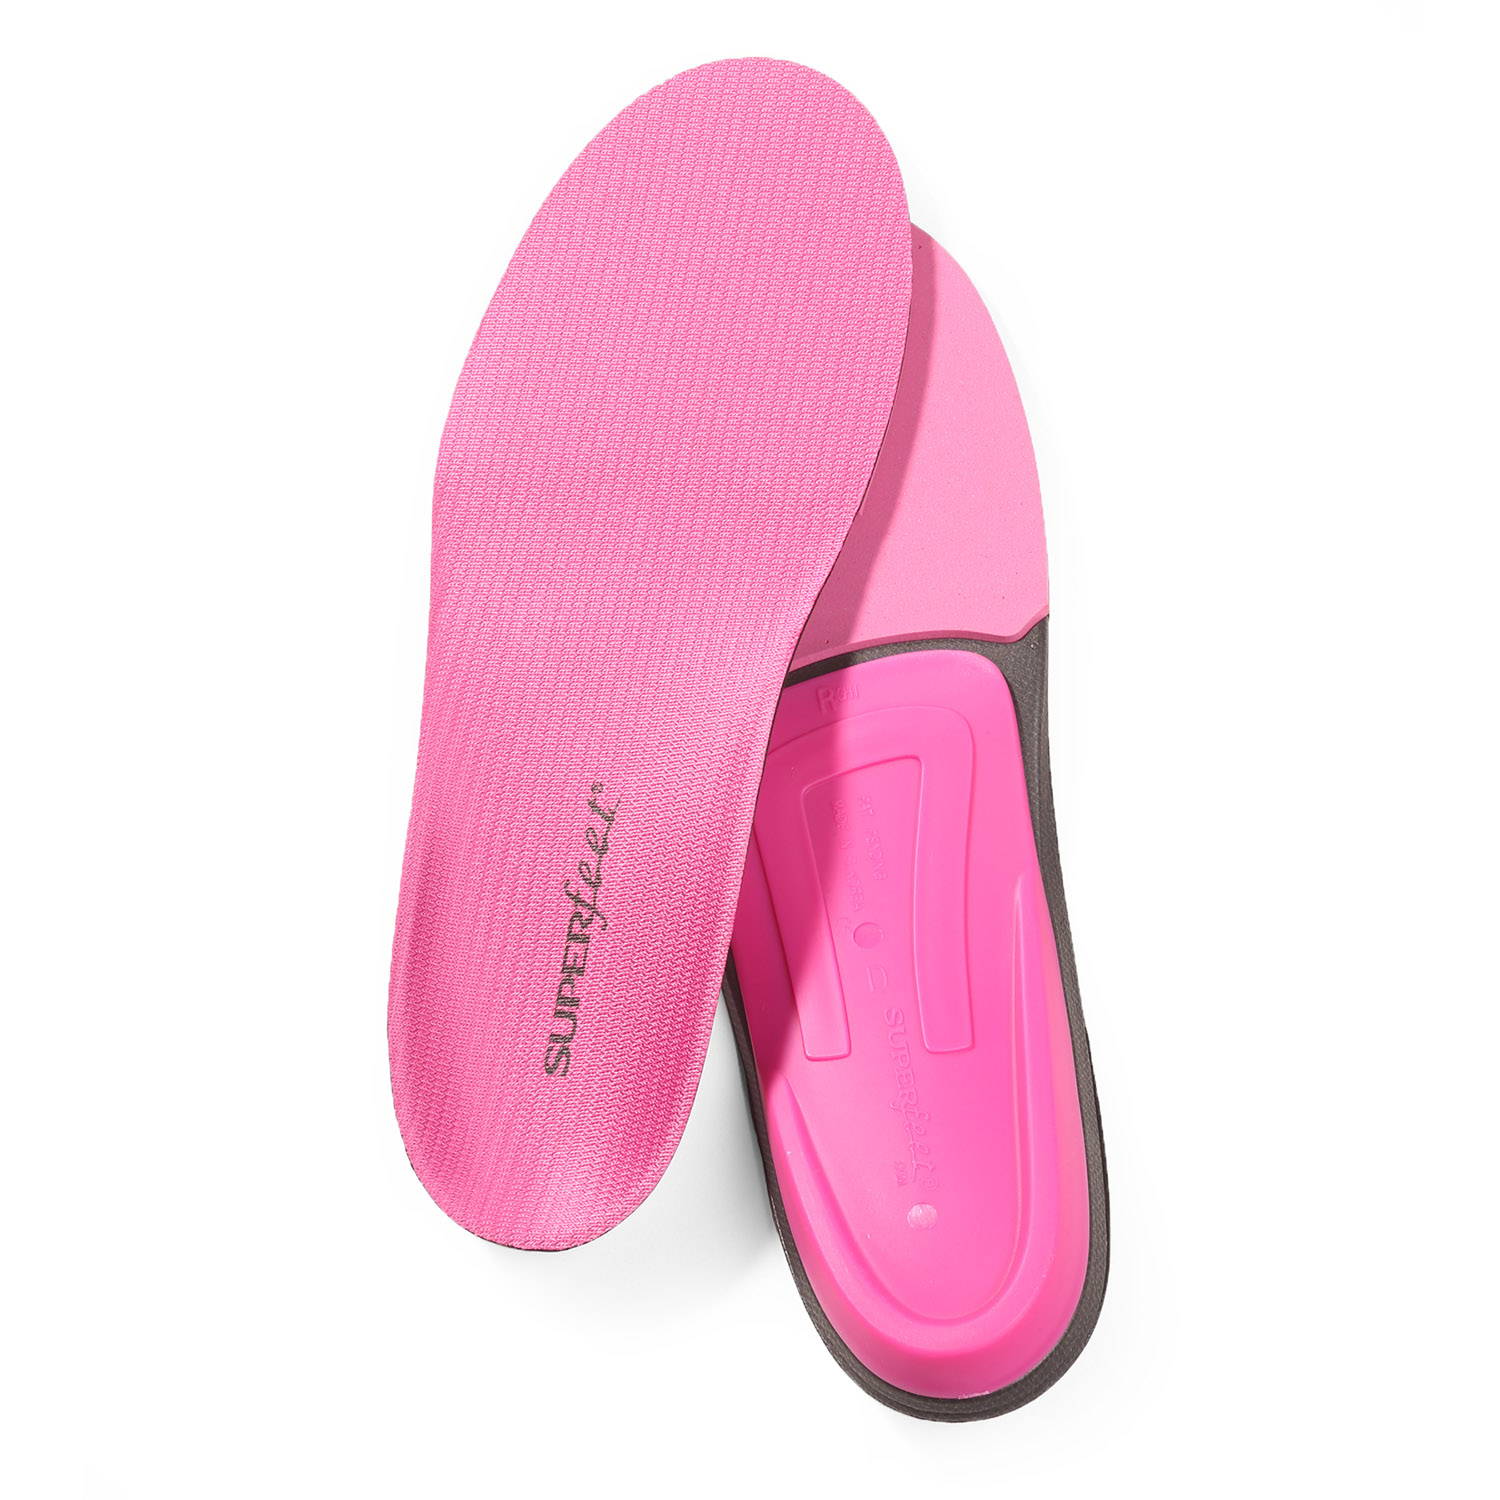 Superfeet Women's Trim-to-Fit Berry Insoles